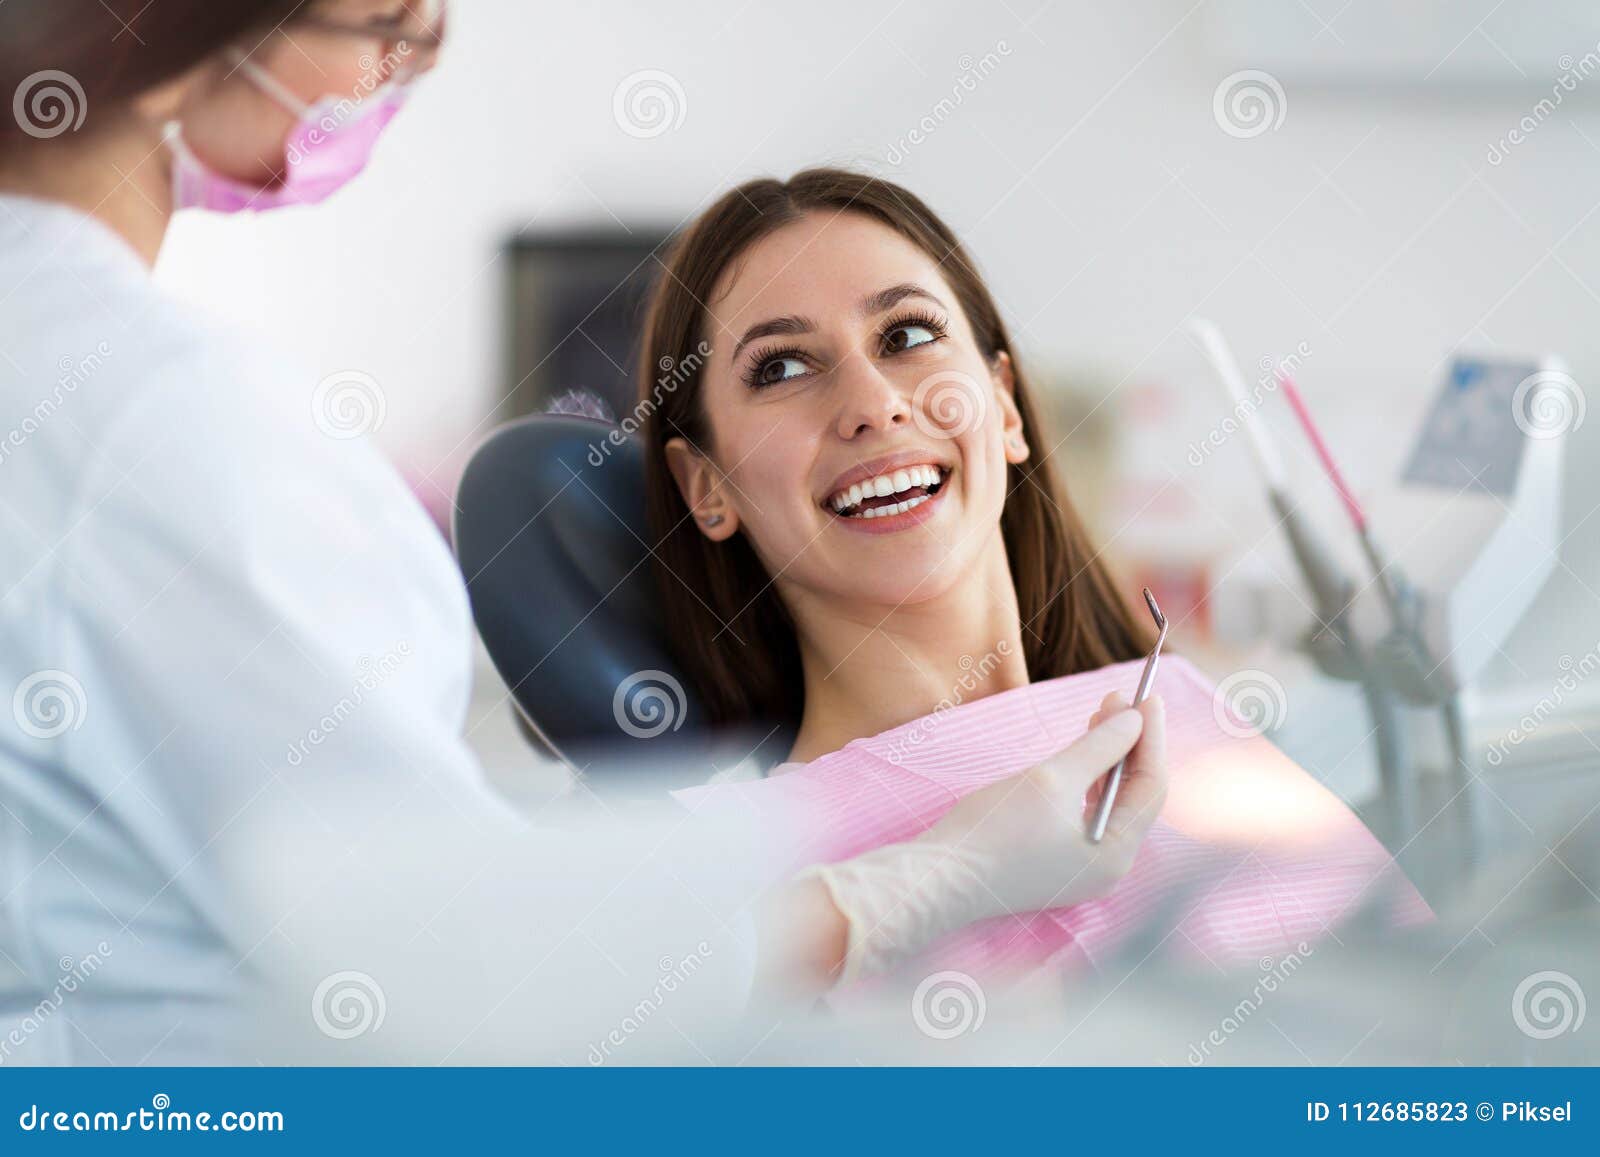 dentist and patient in dentist office